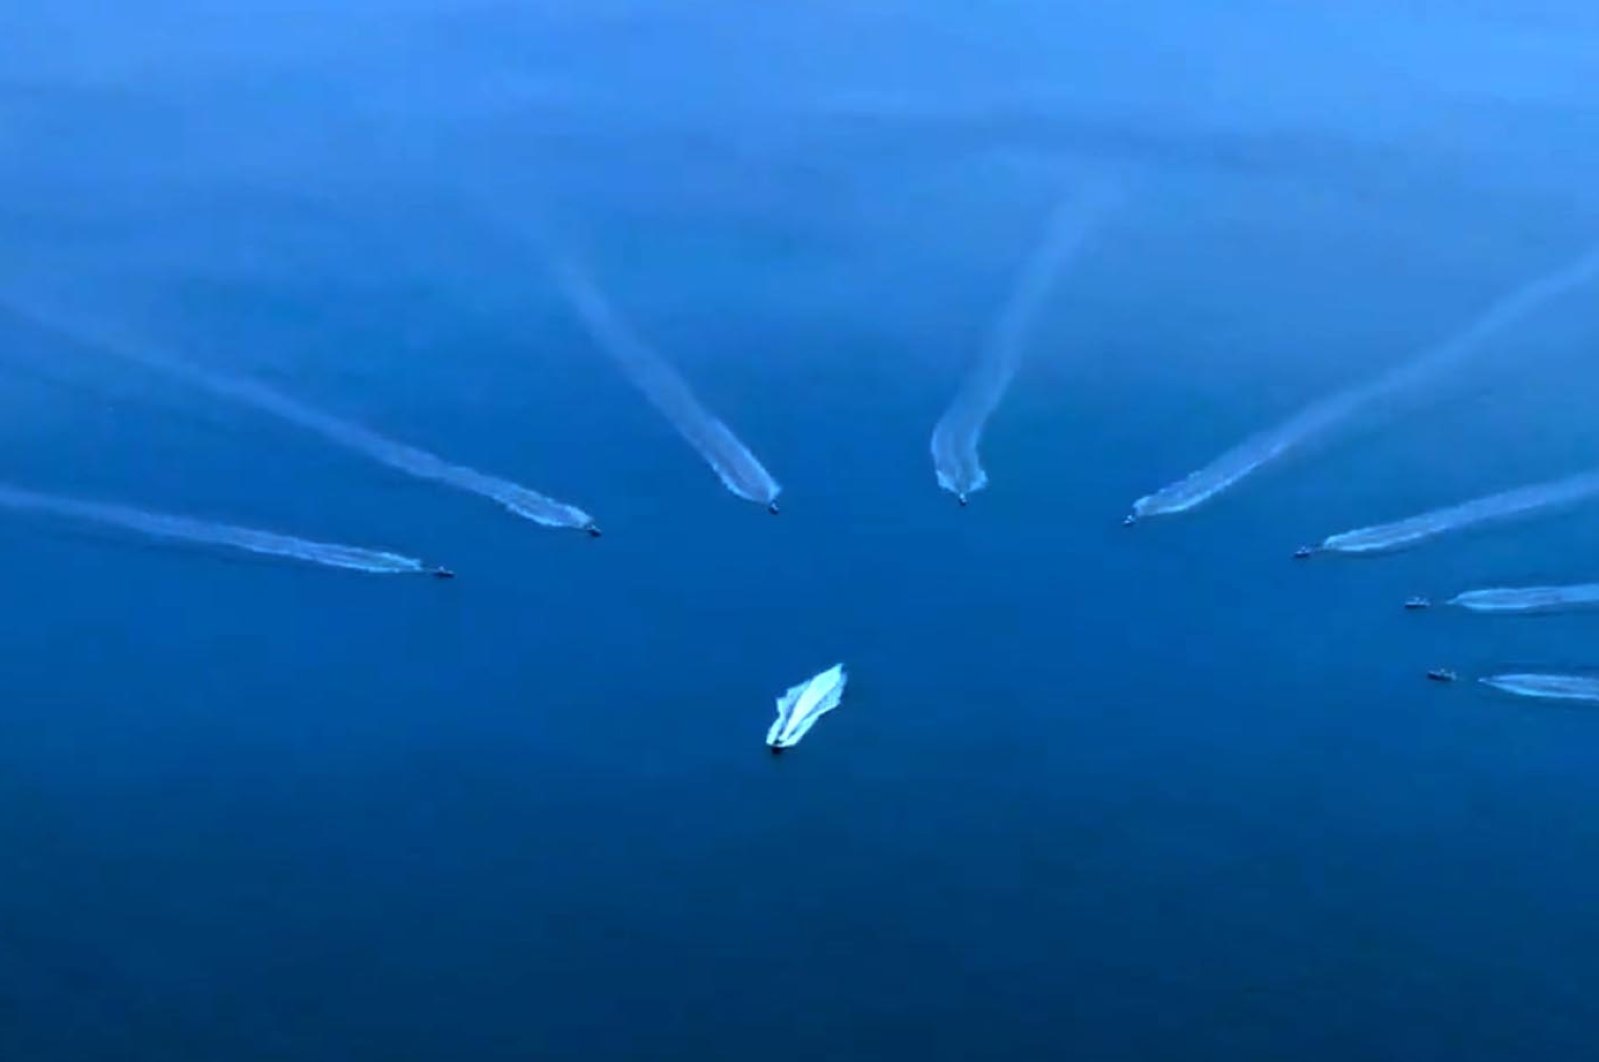 A screen-grab from the video Ismail Demir, the head of the Presidency of Defense Industries (SSB), shared showing the moment when the 8-herd swarm of indigenous armed unmanned surface vessels push away a suspicious boat, Ankara, Türkiye, Dec. 13, 2022. (DHA Photo)